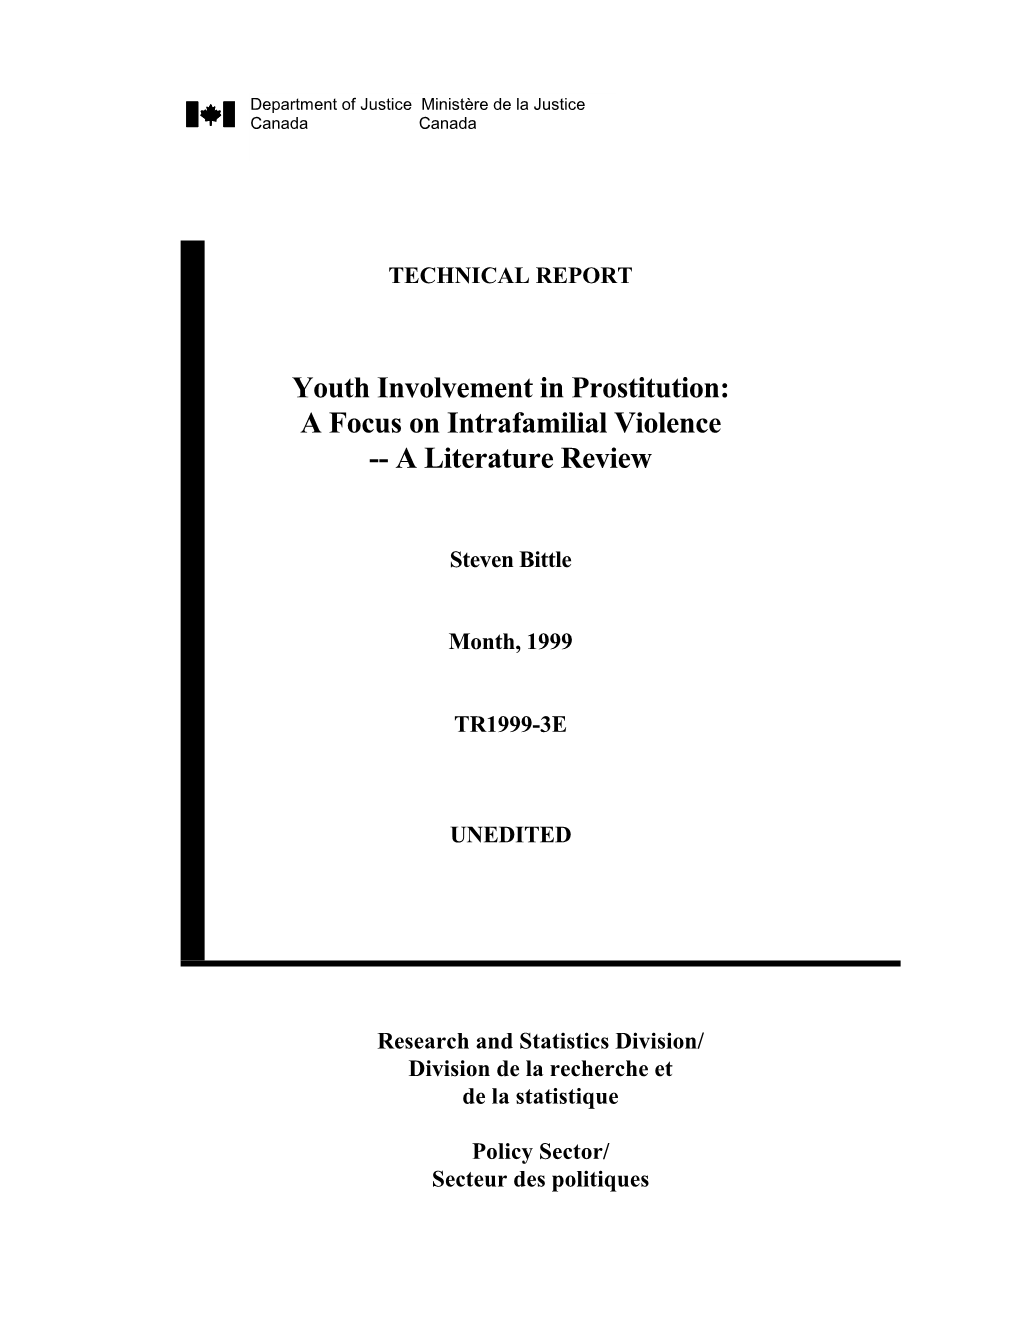 Youth Involvement in Prostitution: a Focus on Intrafamilial Violence -- a Literature Review